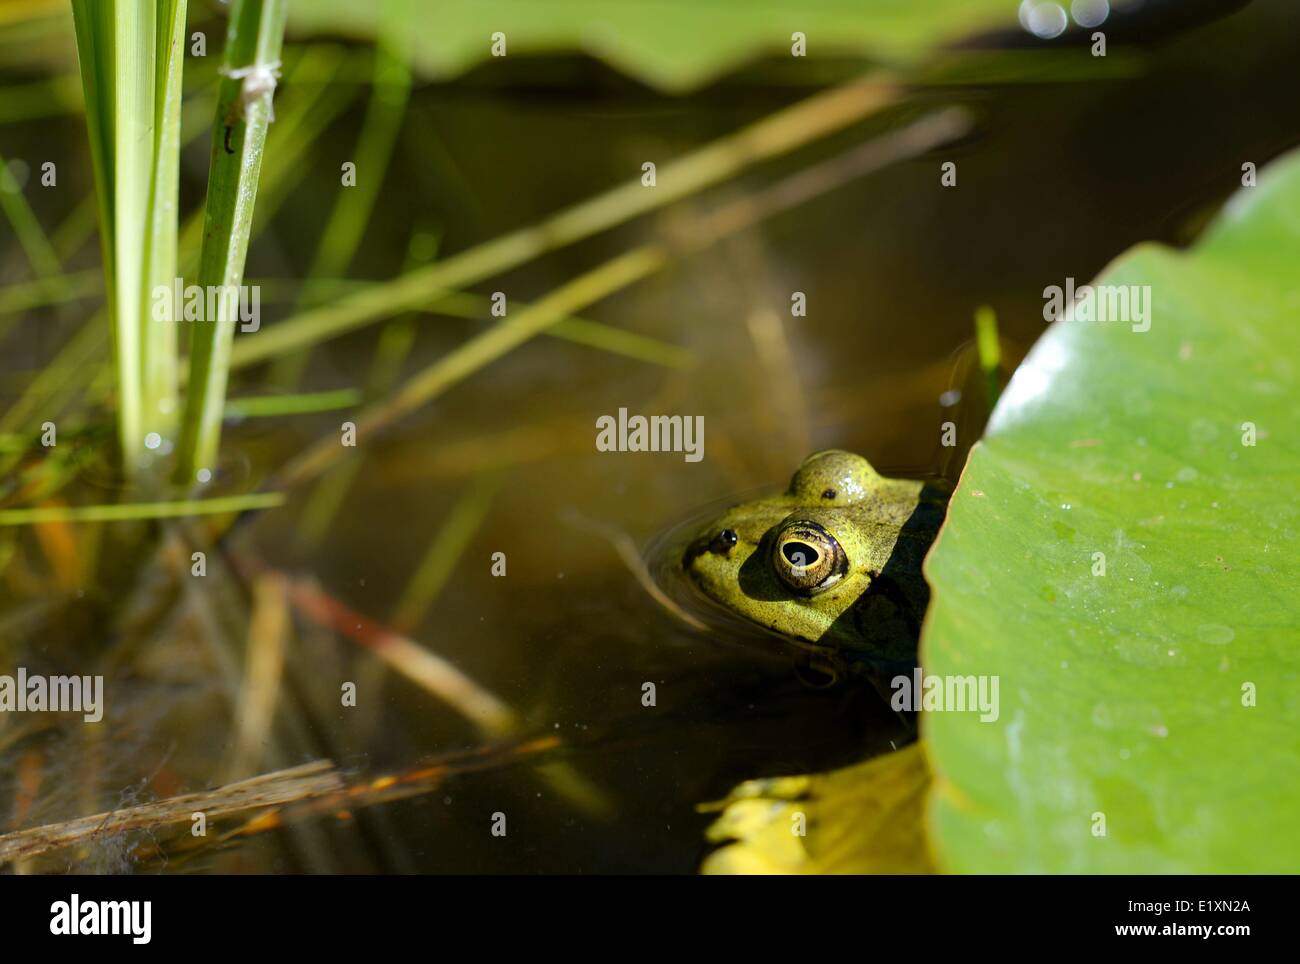 A frog in a garden in germany, 06. June 2014. Photo: Frank May Stock Photo